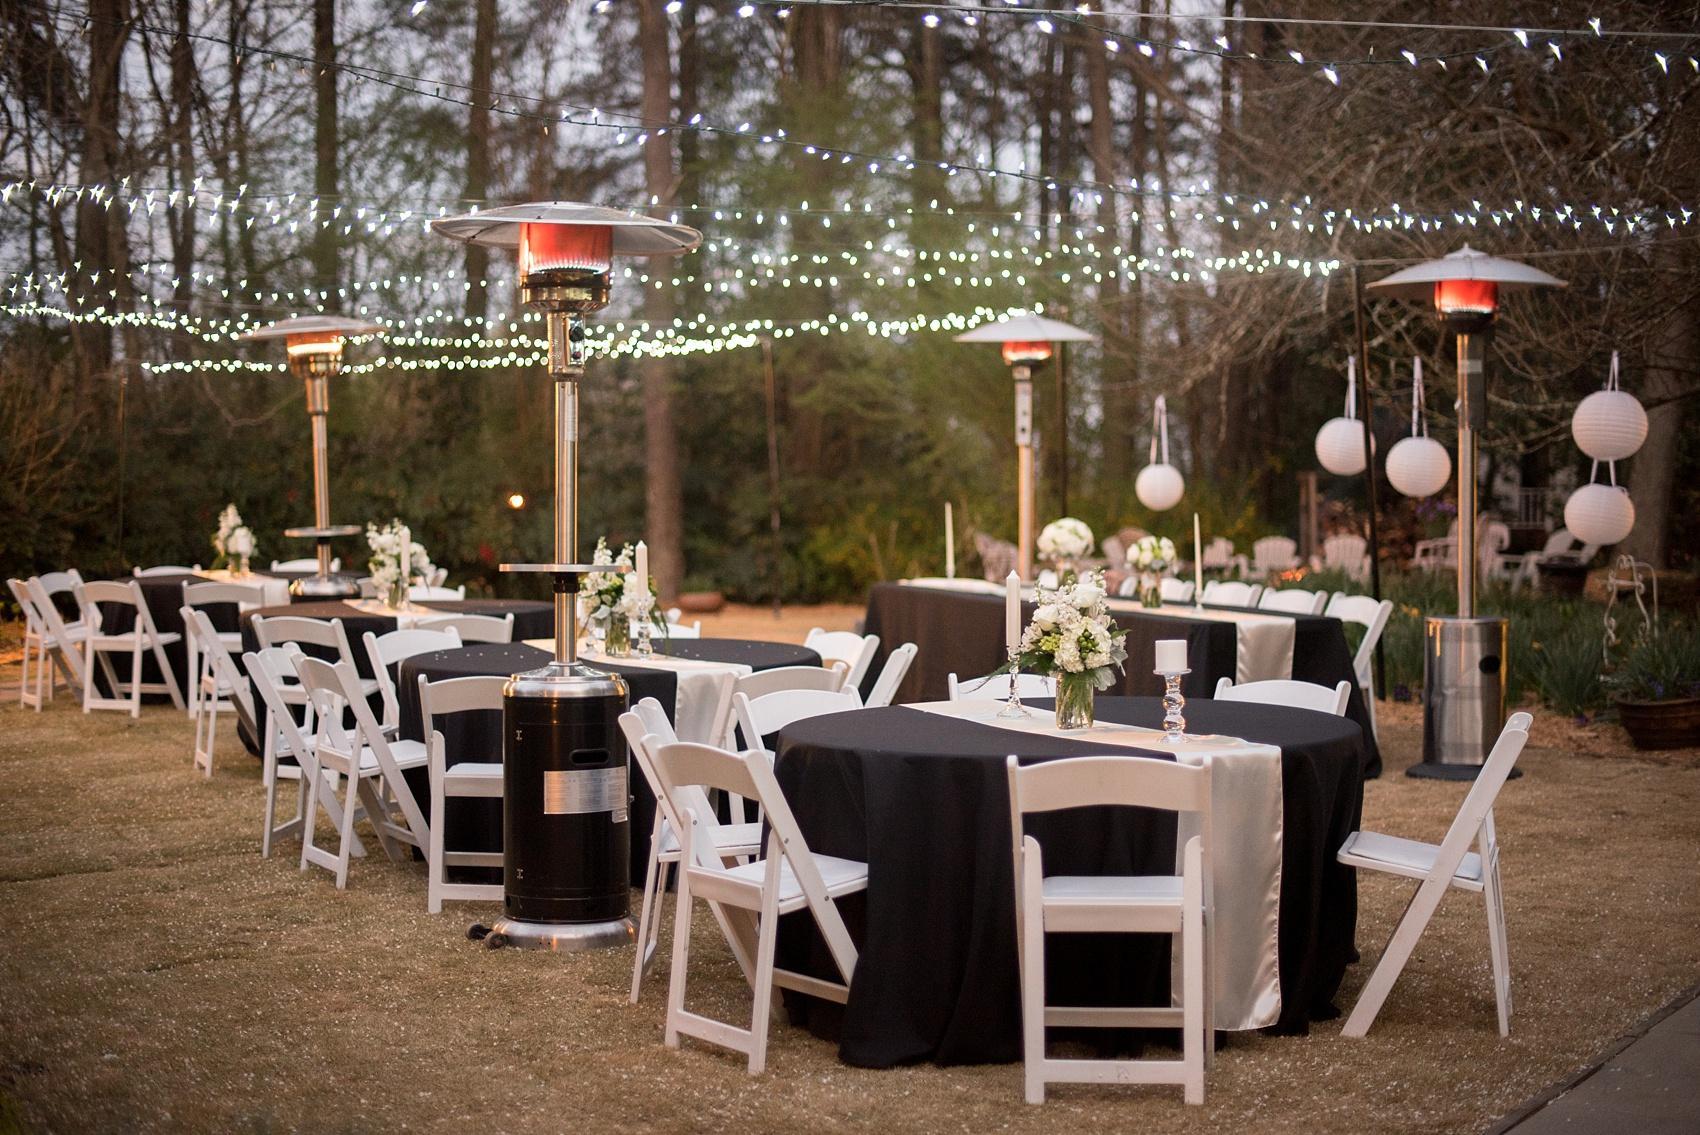 Four Oaks Manor wedding in Atlanta with black linens, paper lanterns, and white flowers in mason jars. Photos by Mikkel Paige Photography.